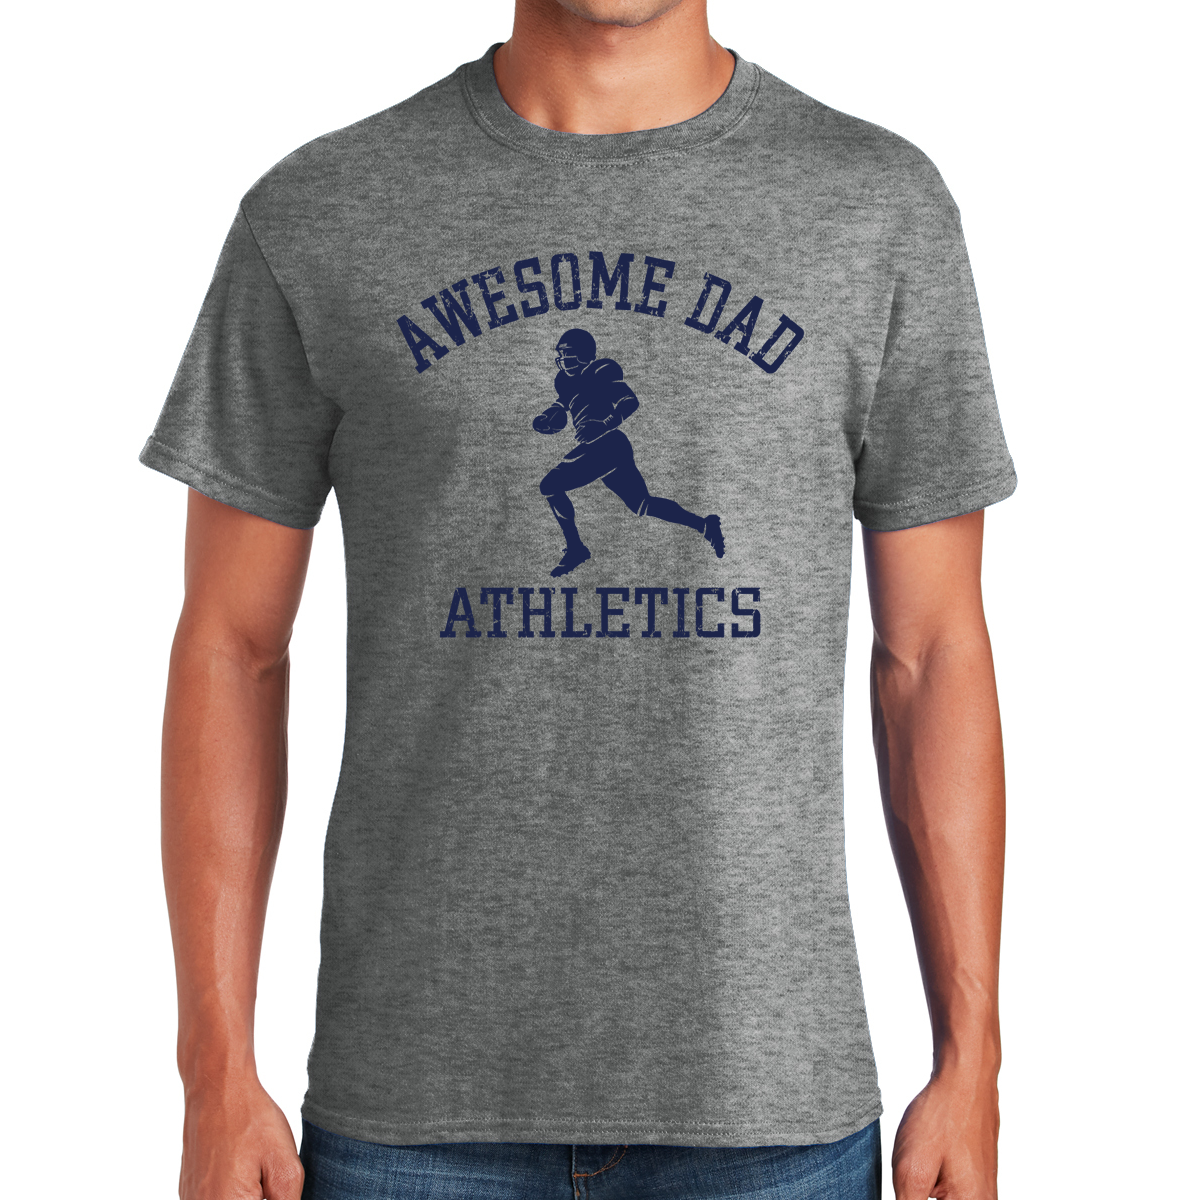 Awesome Dad Athletics Football Running Back Speed and Style on the Gridiron Gifts for Dads T-shirt